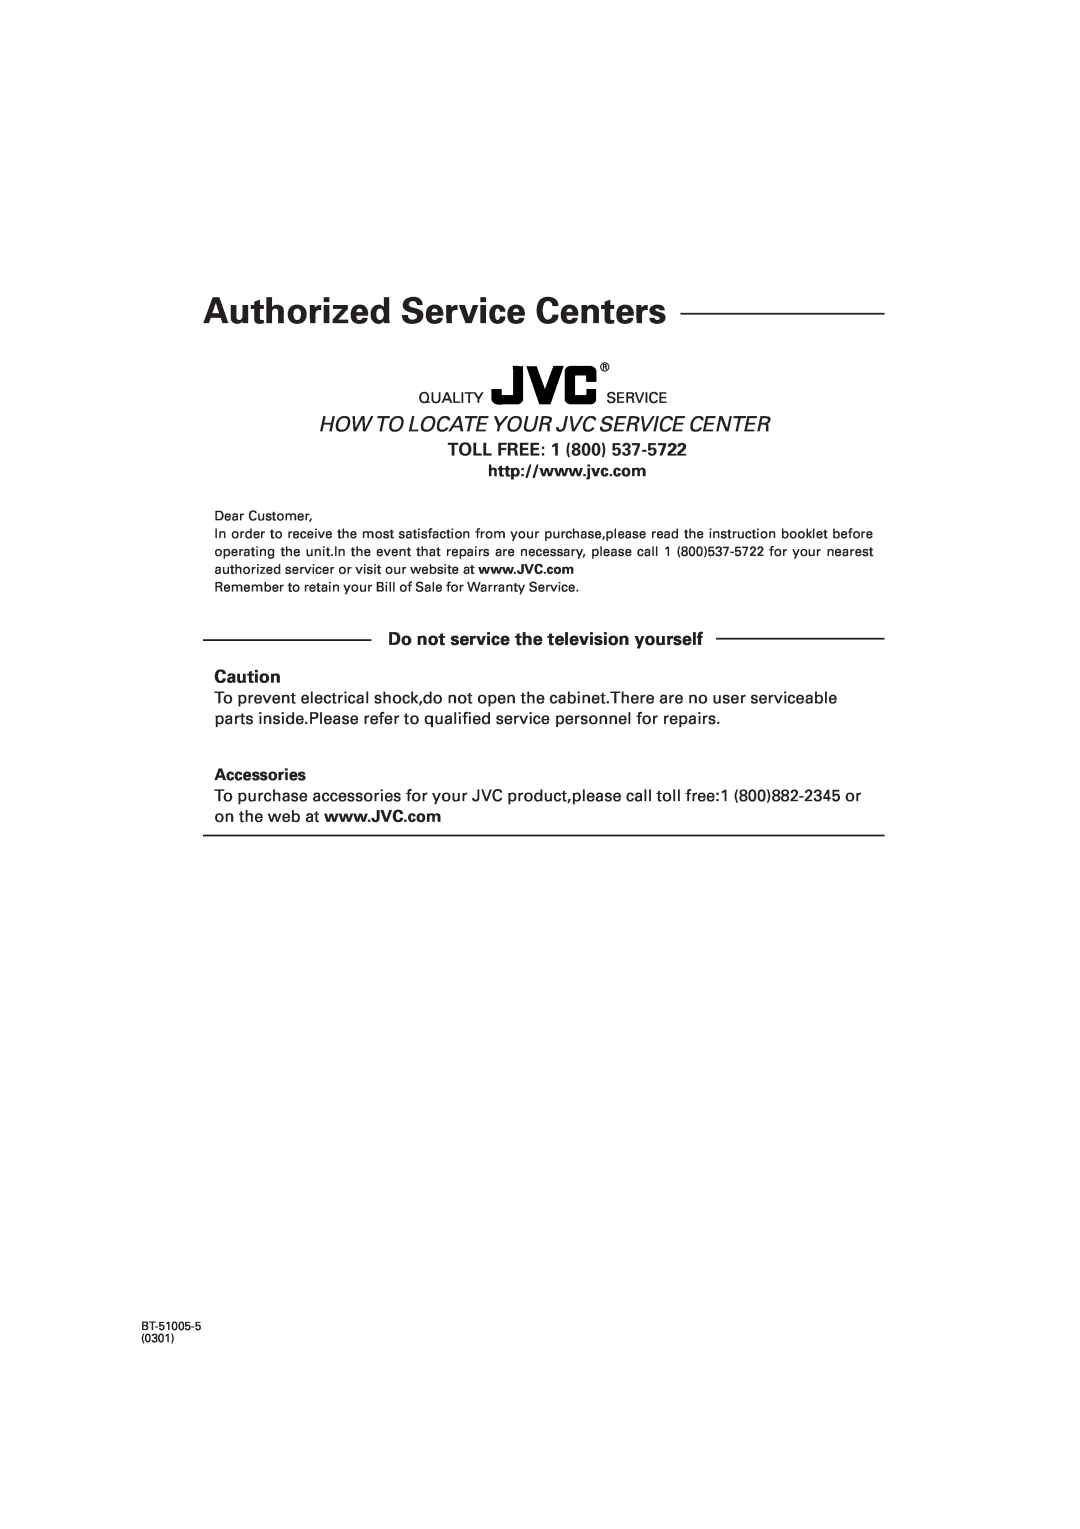 JVC TH-A32 manual Toll Free, Do not service the television yourself, Authorized Service Centers, Accessories 